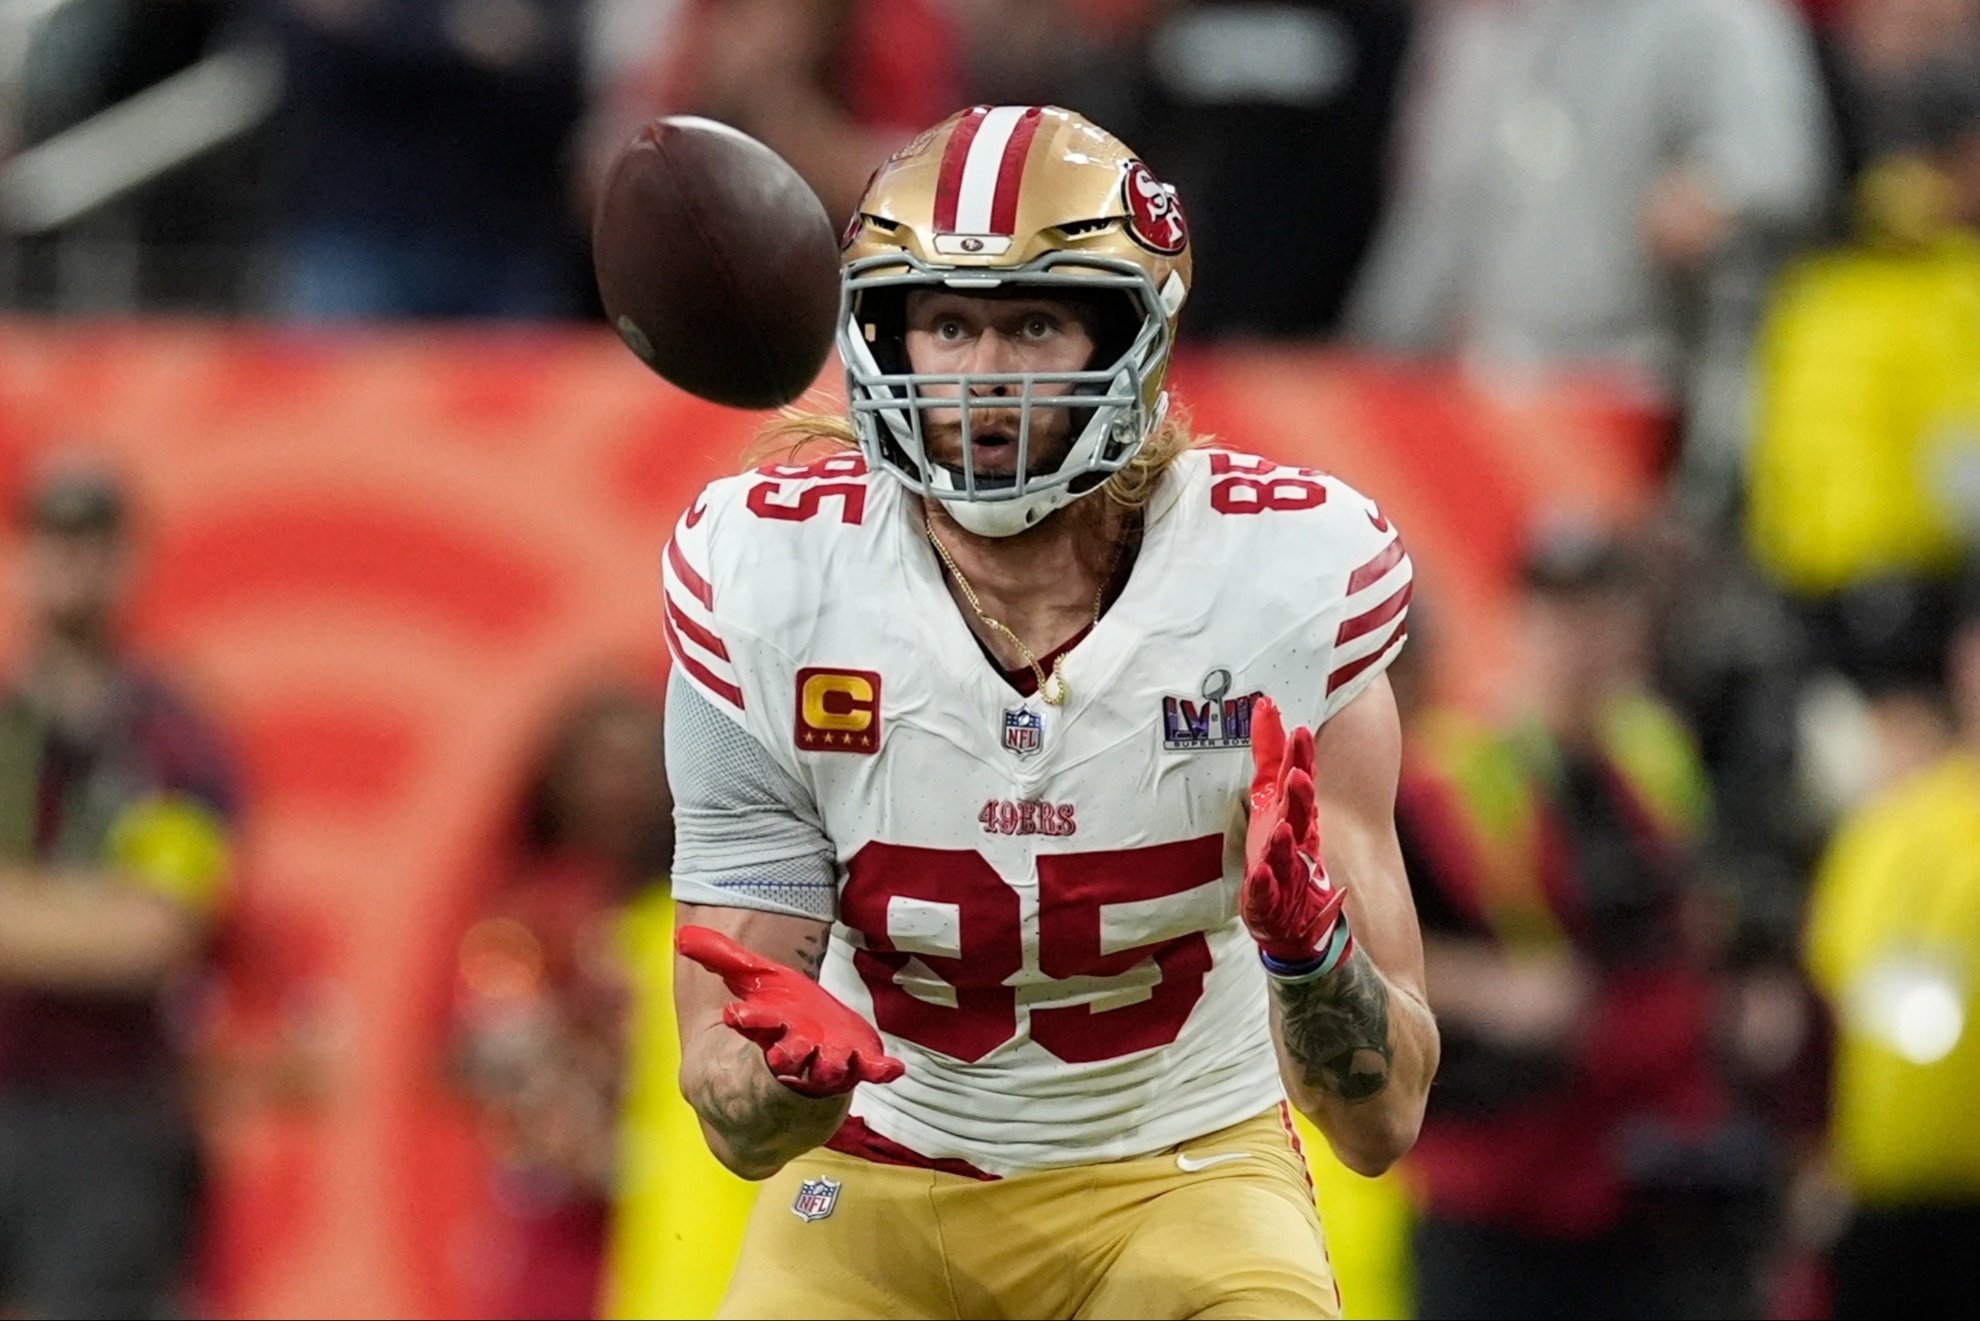 49ers star tight end George Kittle.